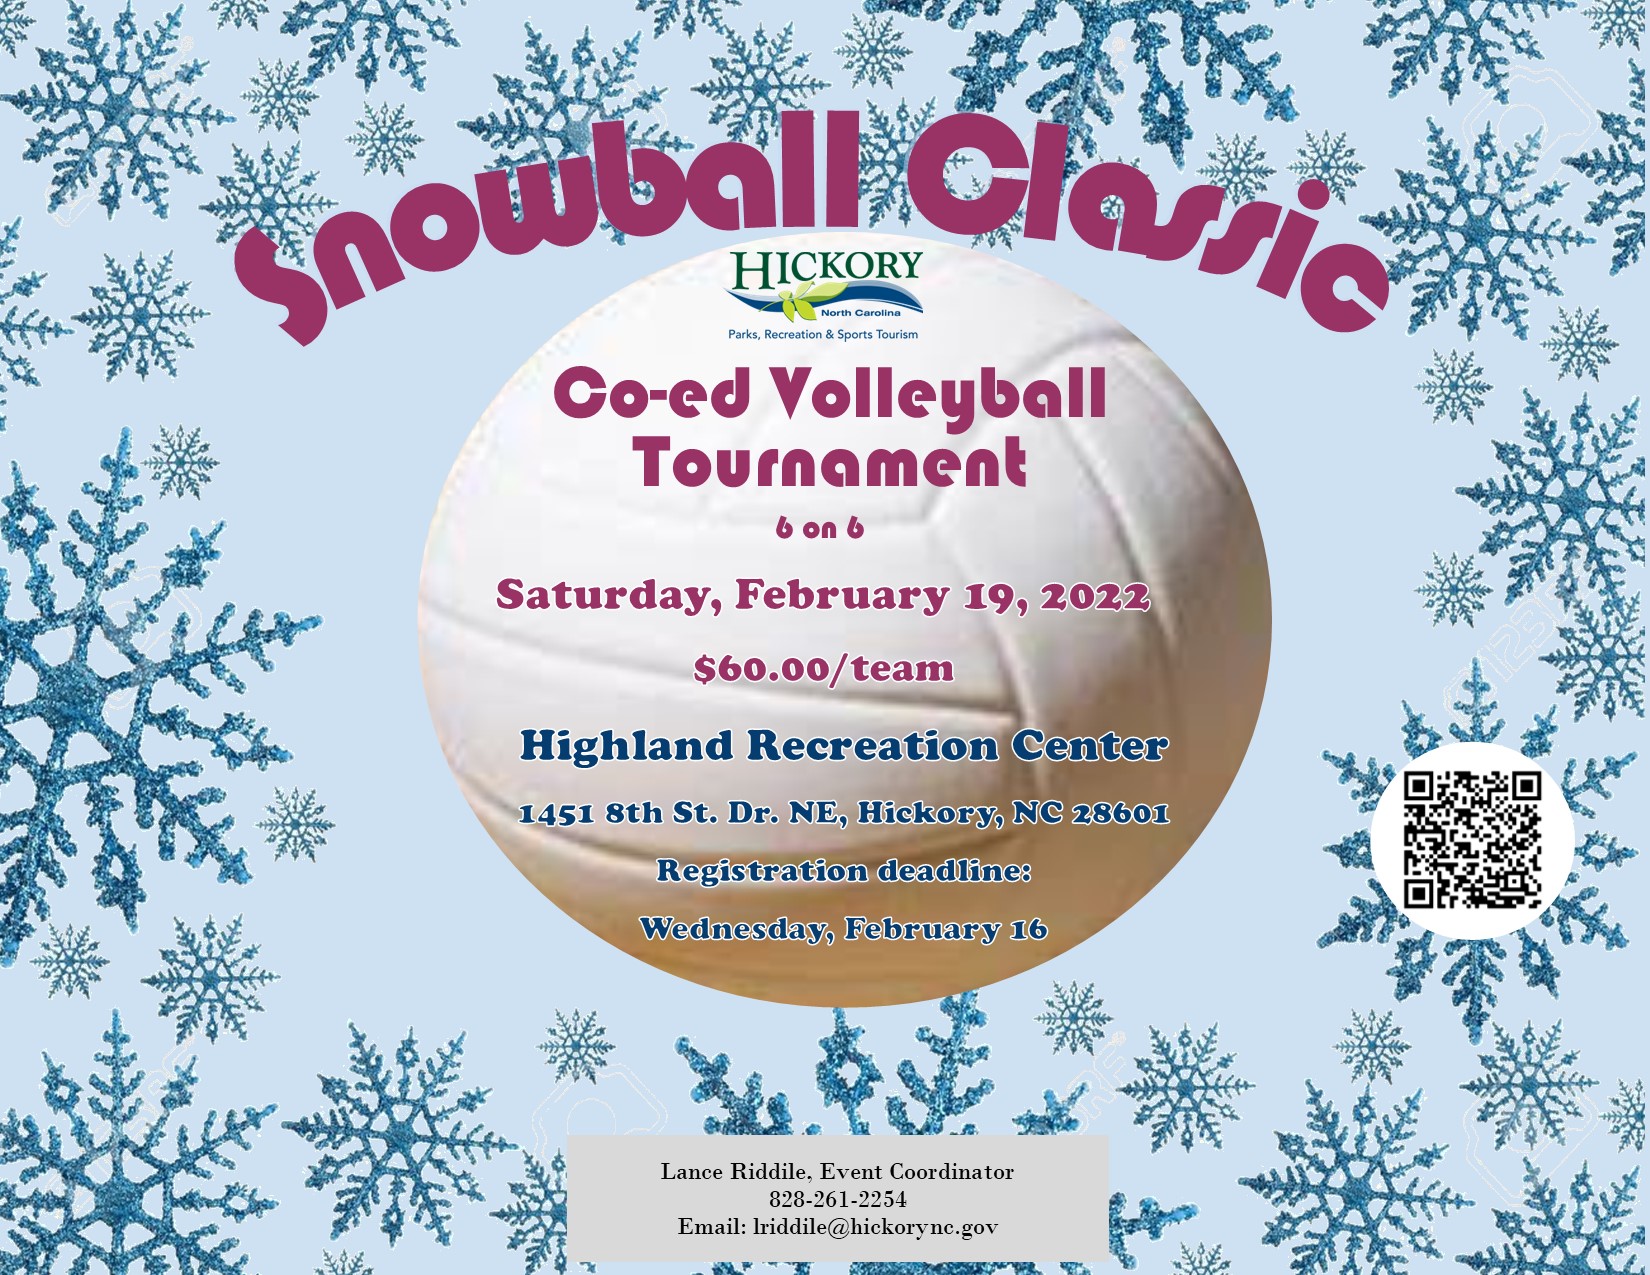 Snowball Classic Co-ed Volleyball Tournament